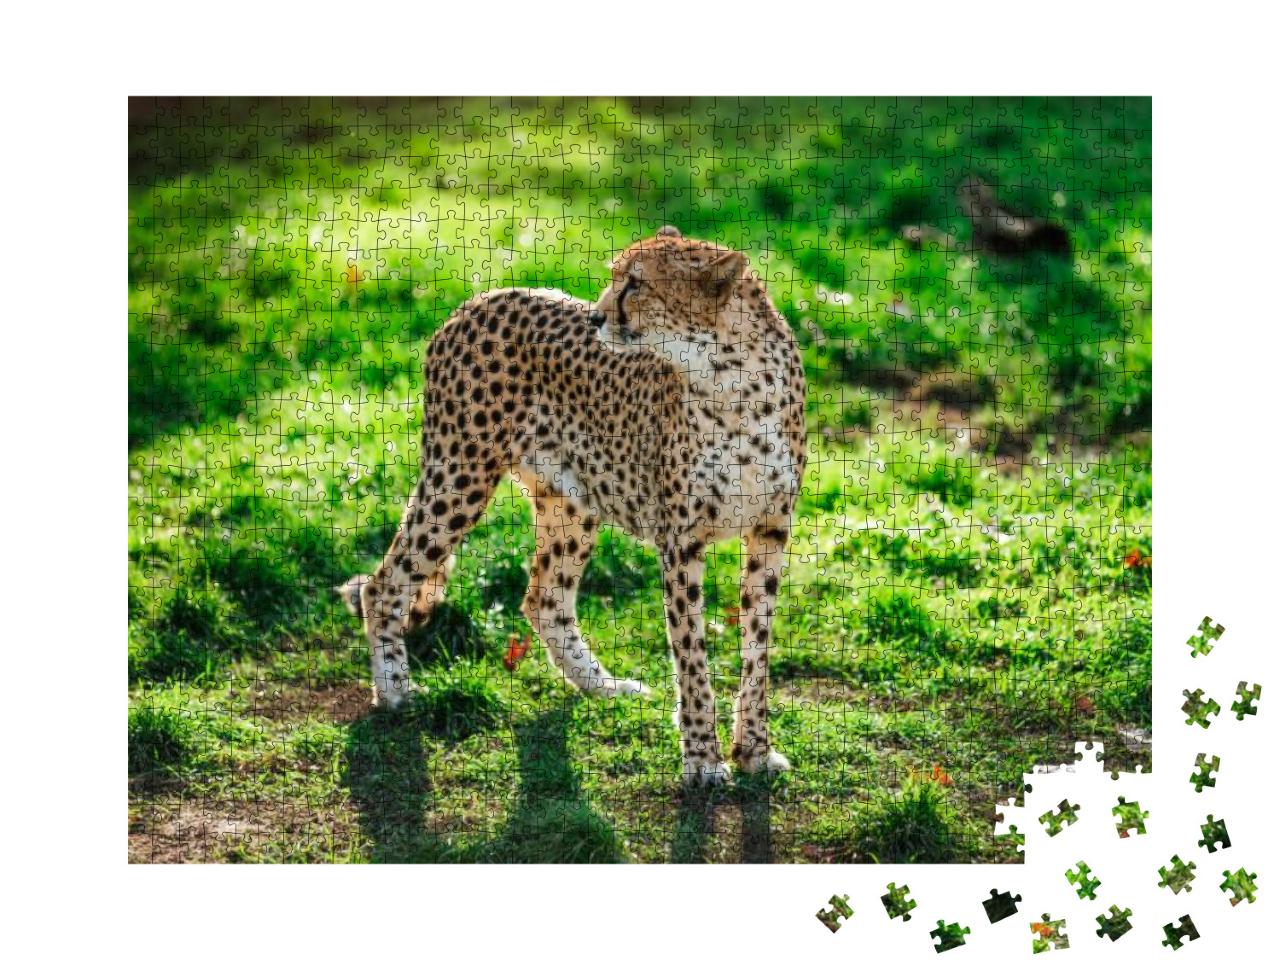 Cheetah Wildcat on the Green Grass During the Sunset... Jigsaw Puzzle with 1000 pieces